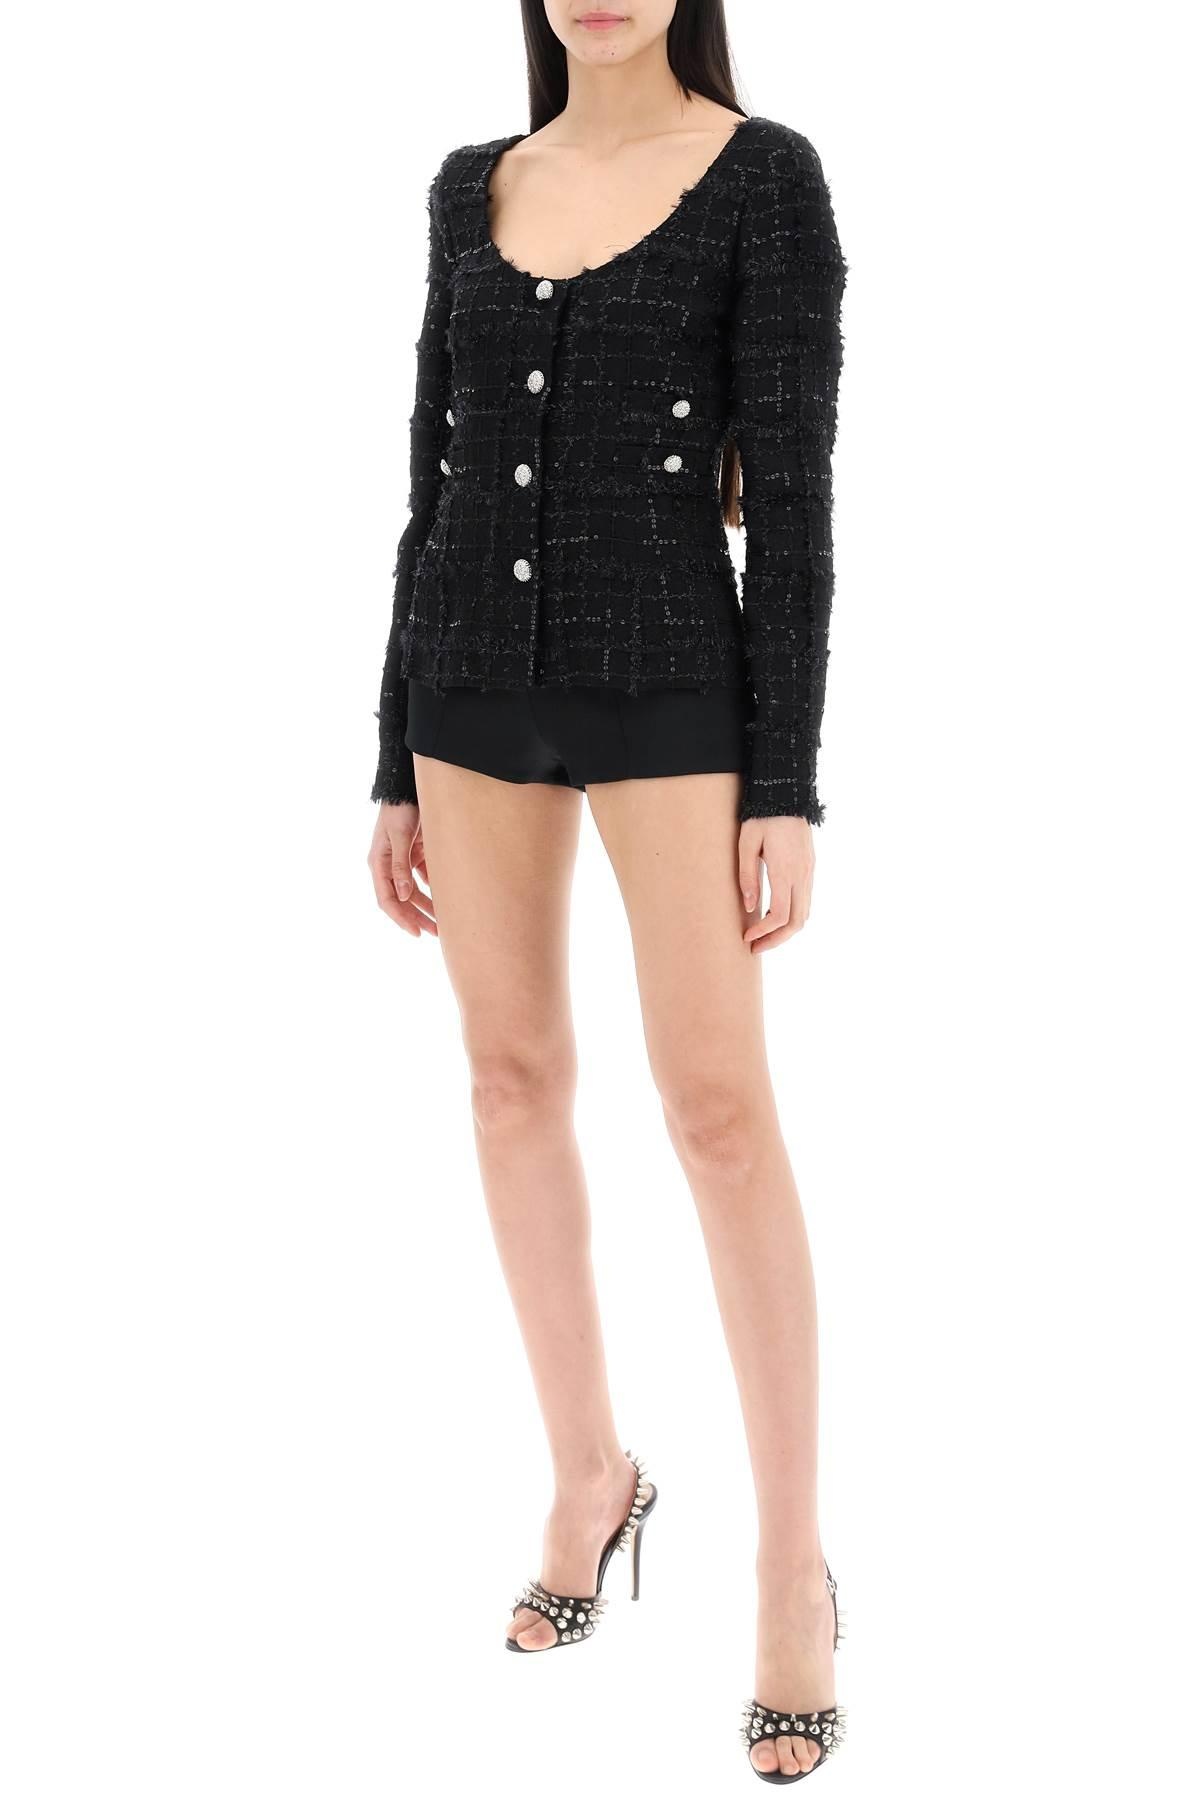 Alessandra Rich Tweed Jacket With Sequins Embell - 2